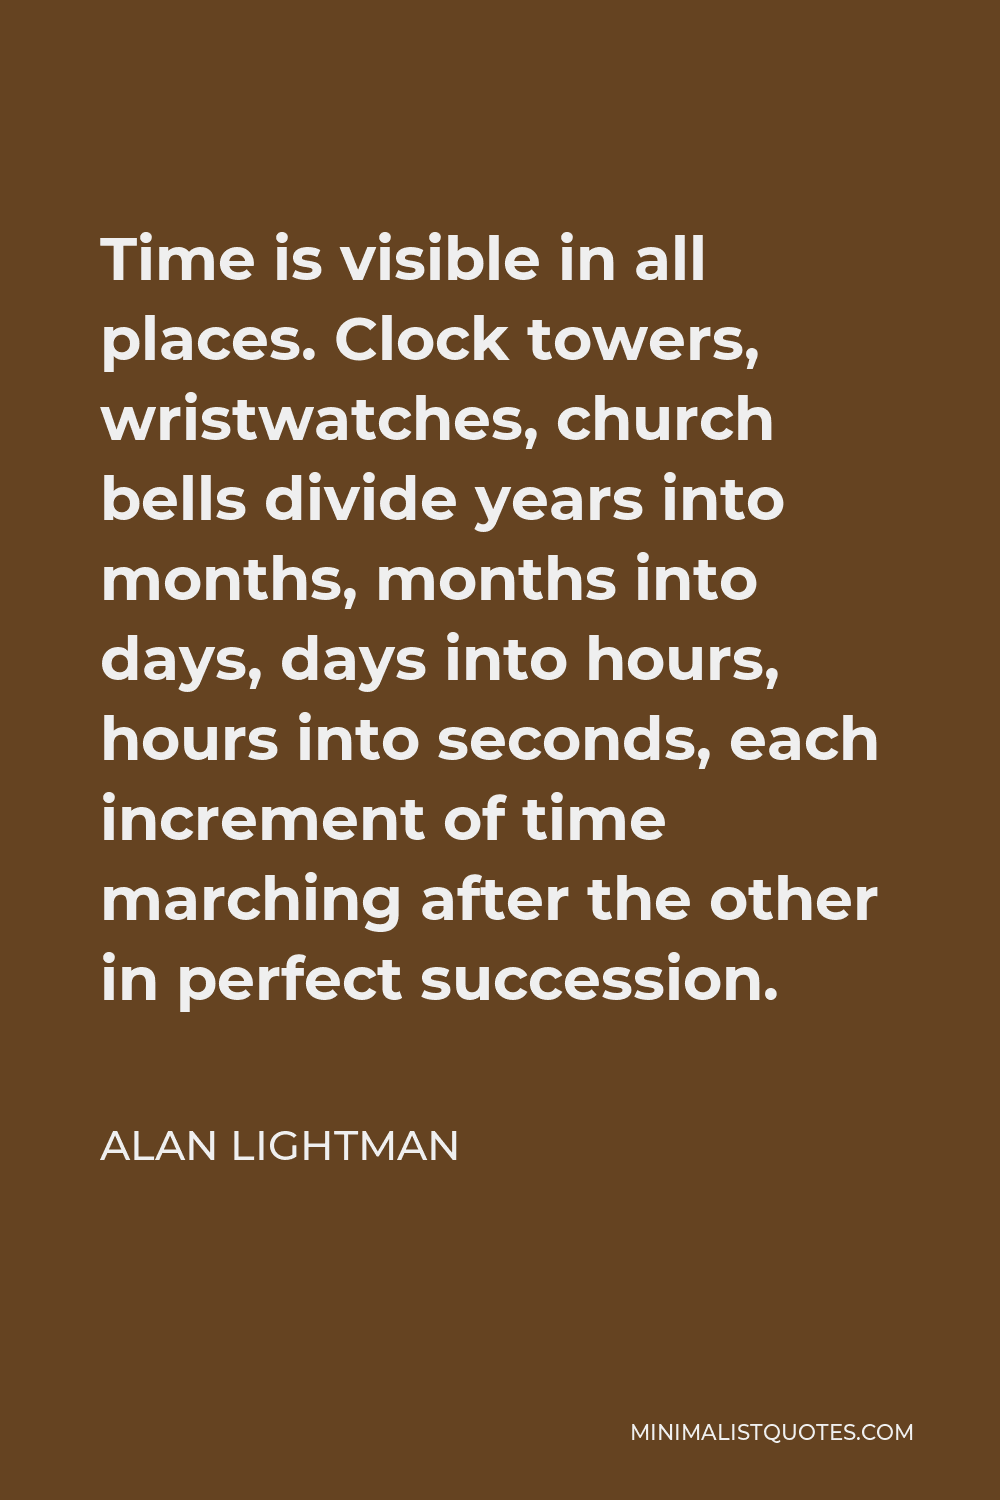 Alan Lightman Quote - Time is visible in all places. Clock towers, wristwatches, church bells divide years into months, months into days, days into hours, hours into seconds, each increment of time marching after the other in perfect succession.